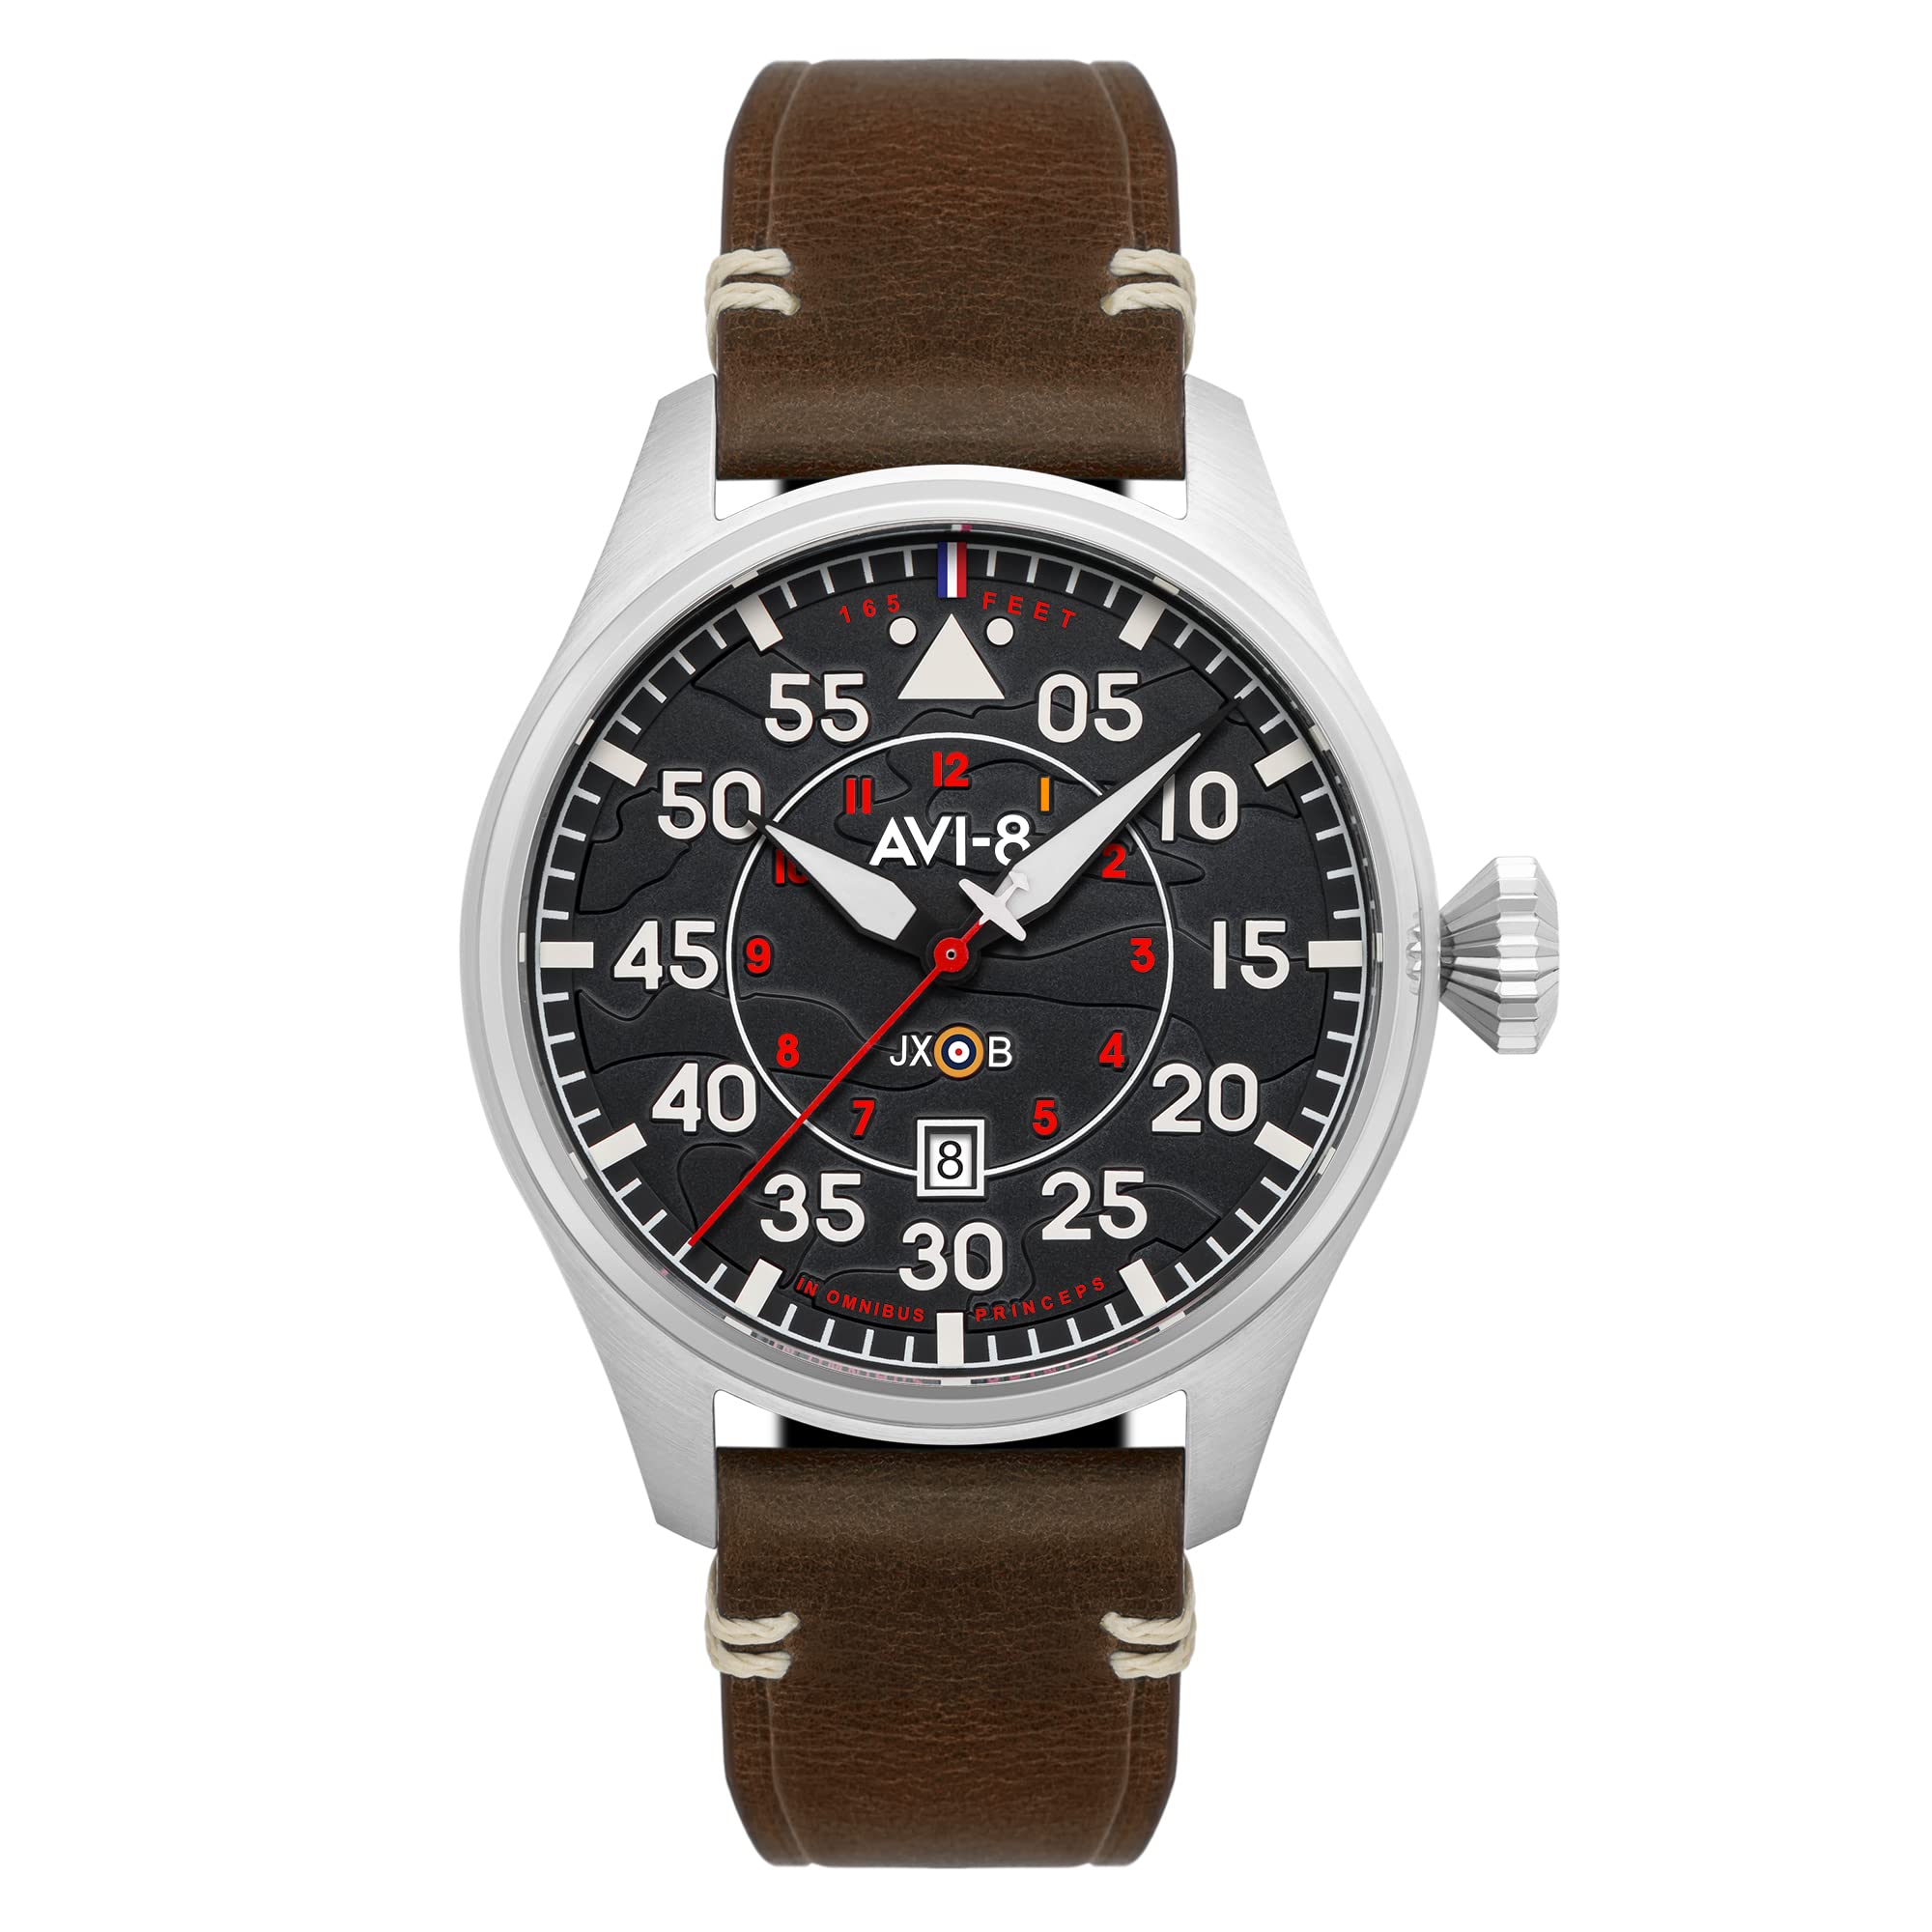 AVI-8 Mens 46mm Hawker Hurricane Clowes Automatic Wittering Pilot Watch with Genuine Leather Strap AV-4097-01並行輸入品